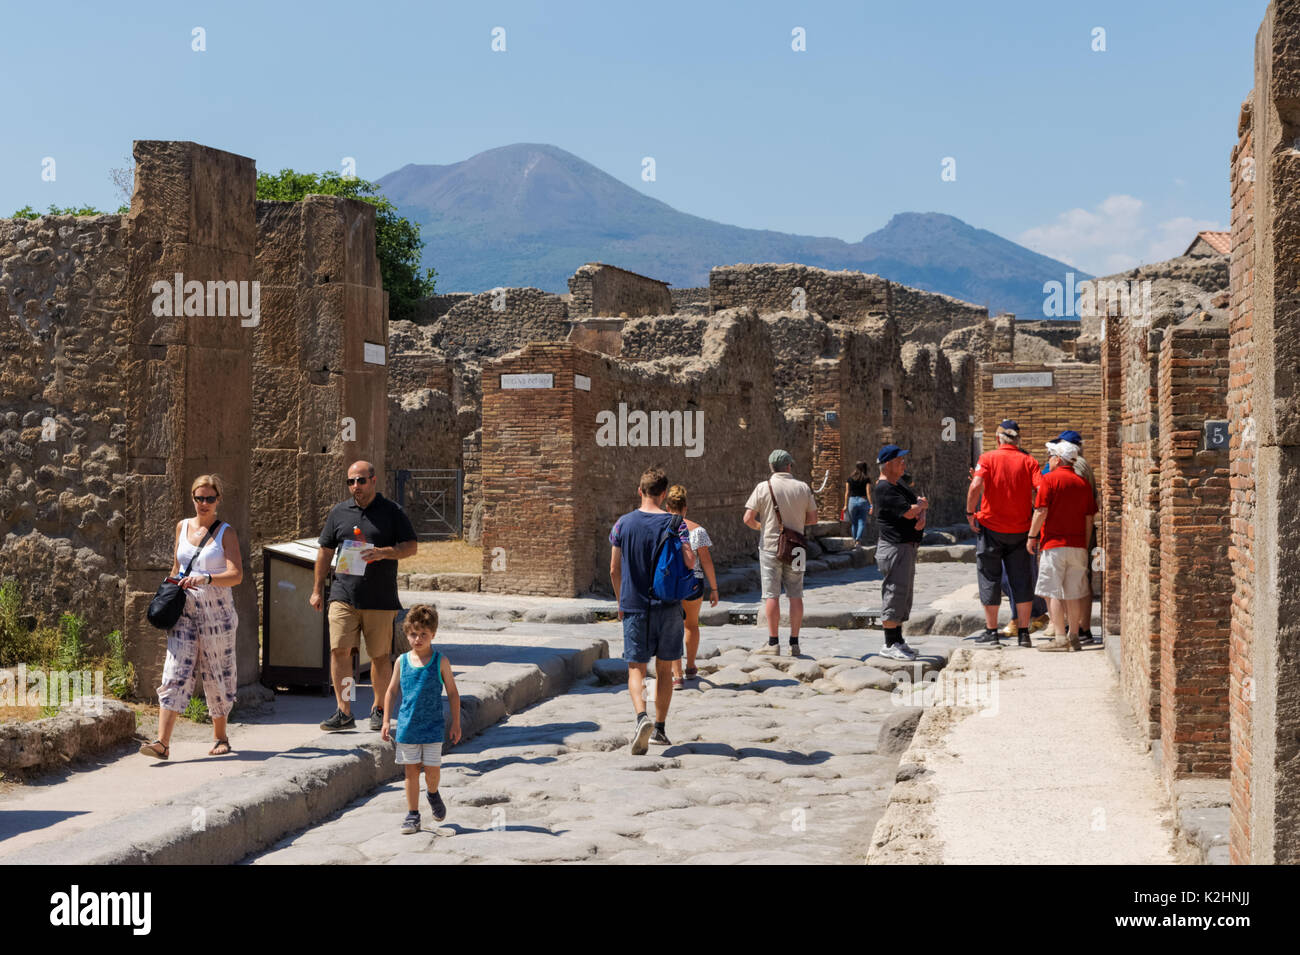 Tourists visiting Roman ruins of Pompeii with Mount Vesuvius in the background, Italy Stock Photo